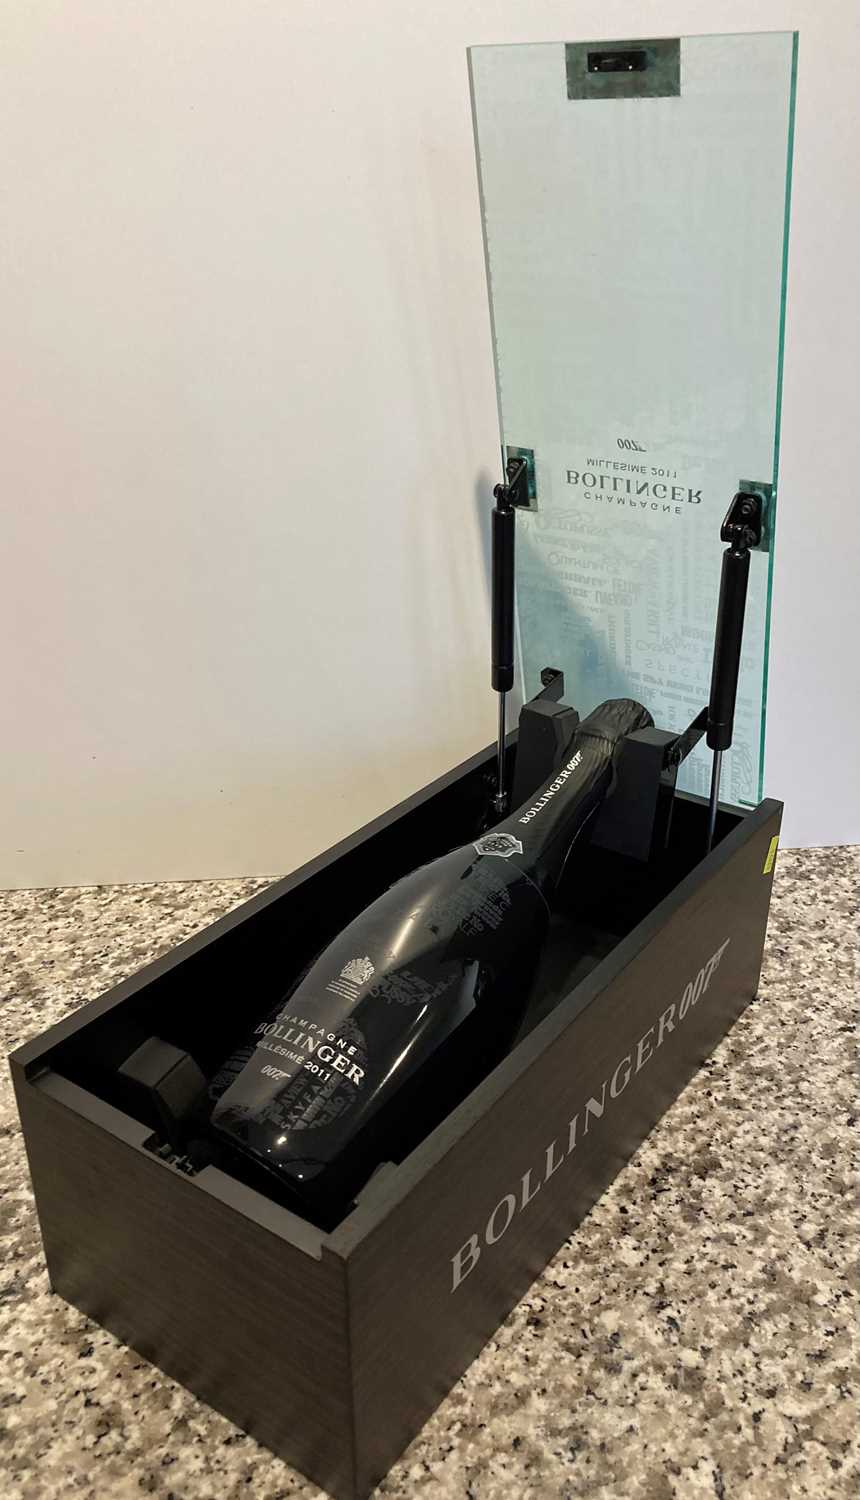 4 Bottles Champagne Bollinger The Exclusive "James Bond 007’ Limited Edition" - Image 3 of 8